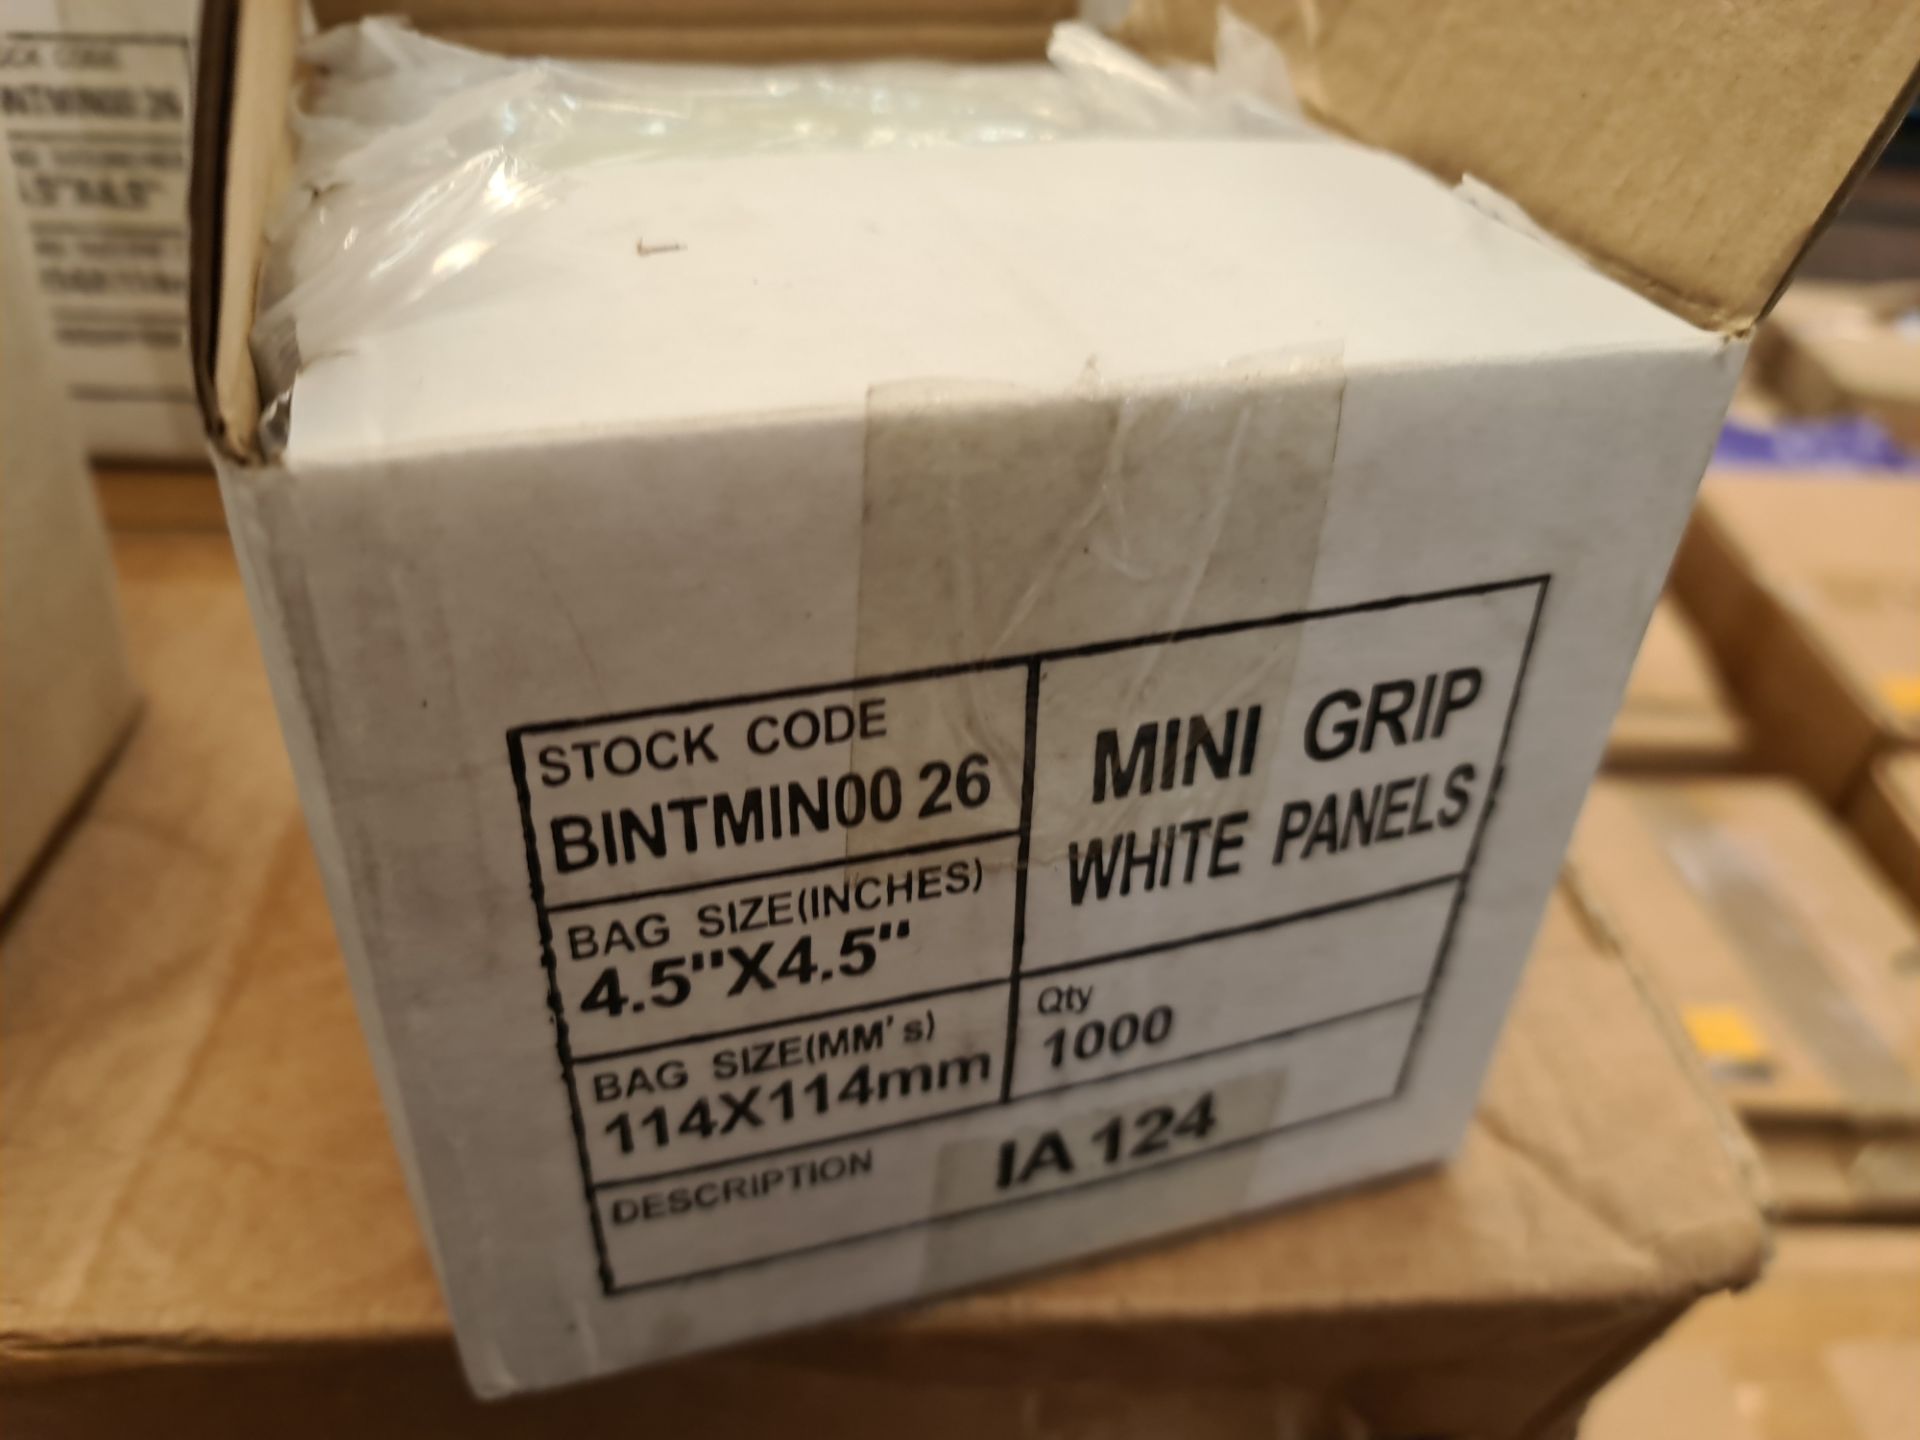 Approx. 28,000 Mini Grip white panel bags, size 114 x 114mm - 2 cartons plus 4 smaller boxes - Image 2 of 4